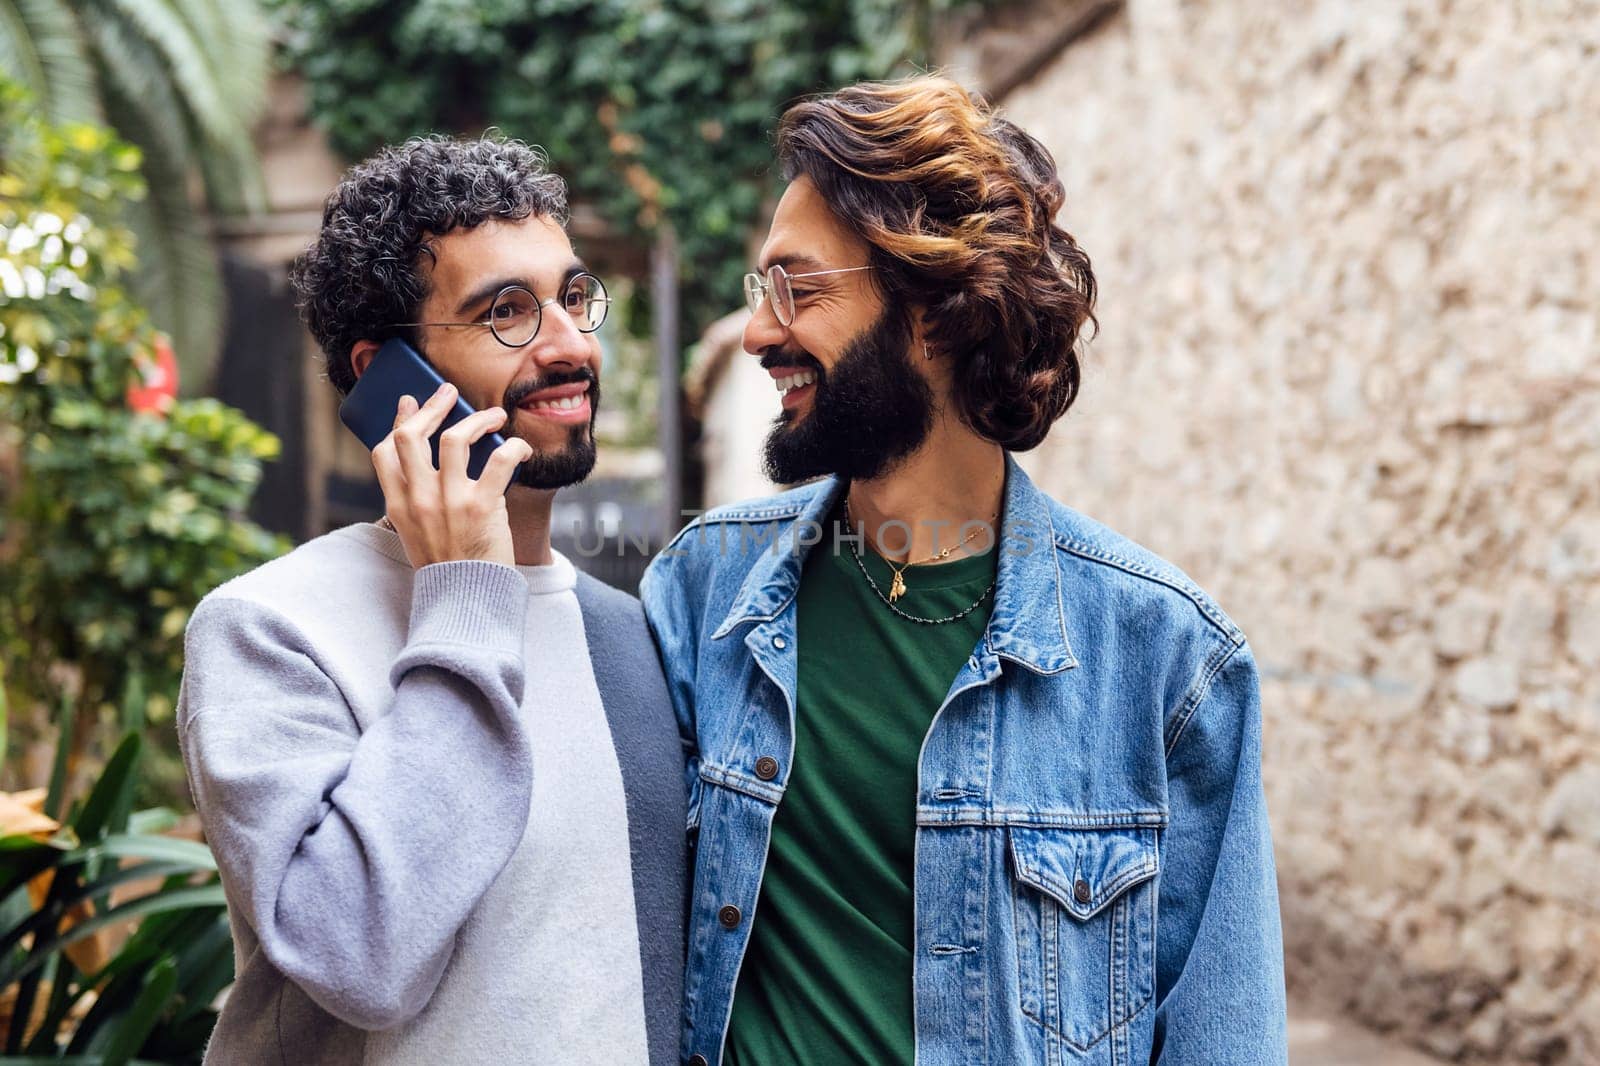 gay male couple smiling happily while one of them is talking on the phone in a nice street with plants, concept of communication and love between people of the same sex